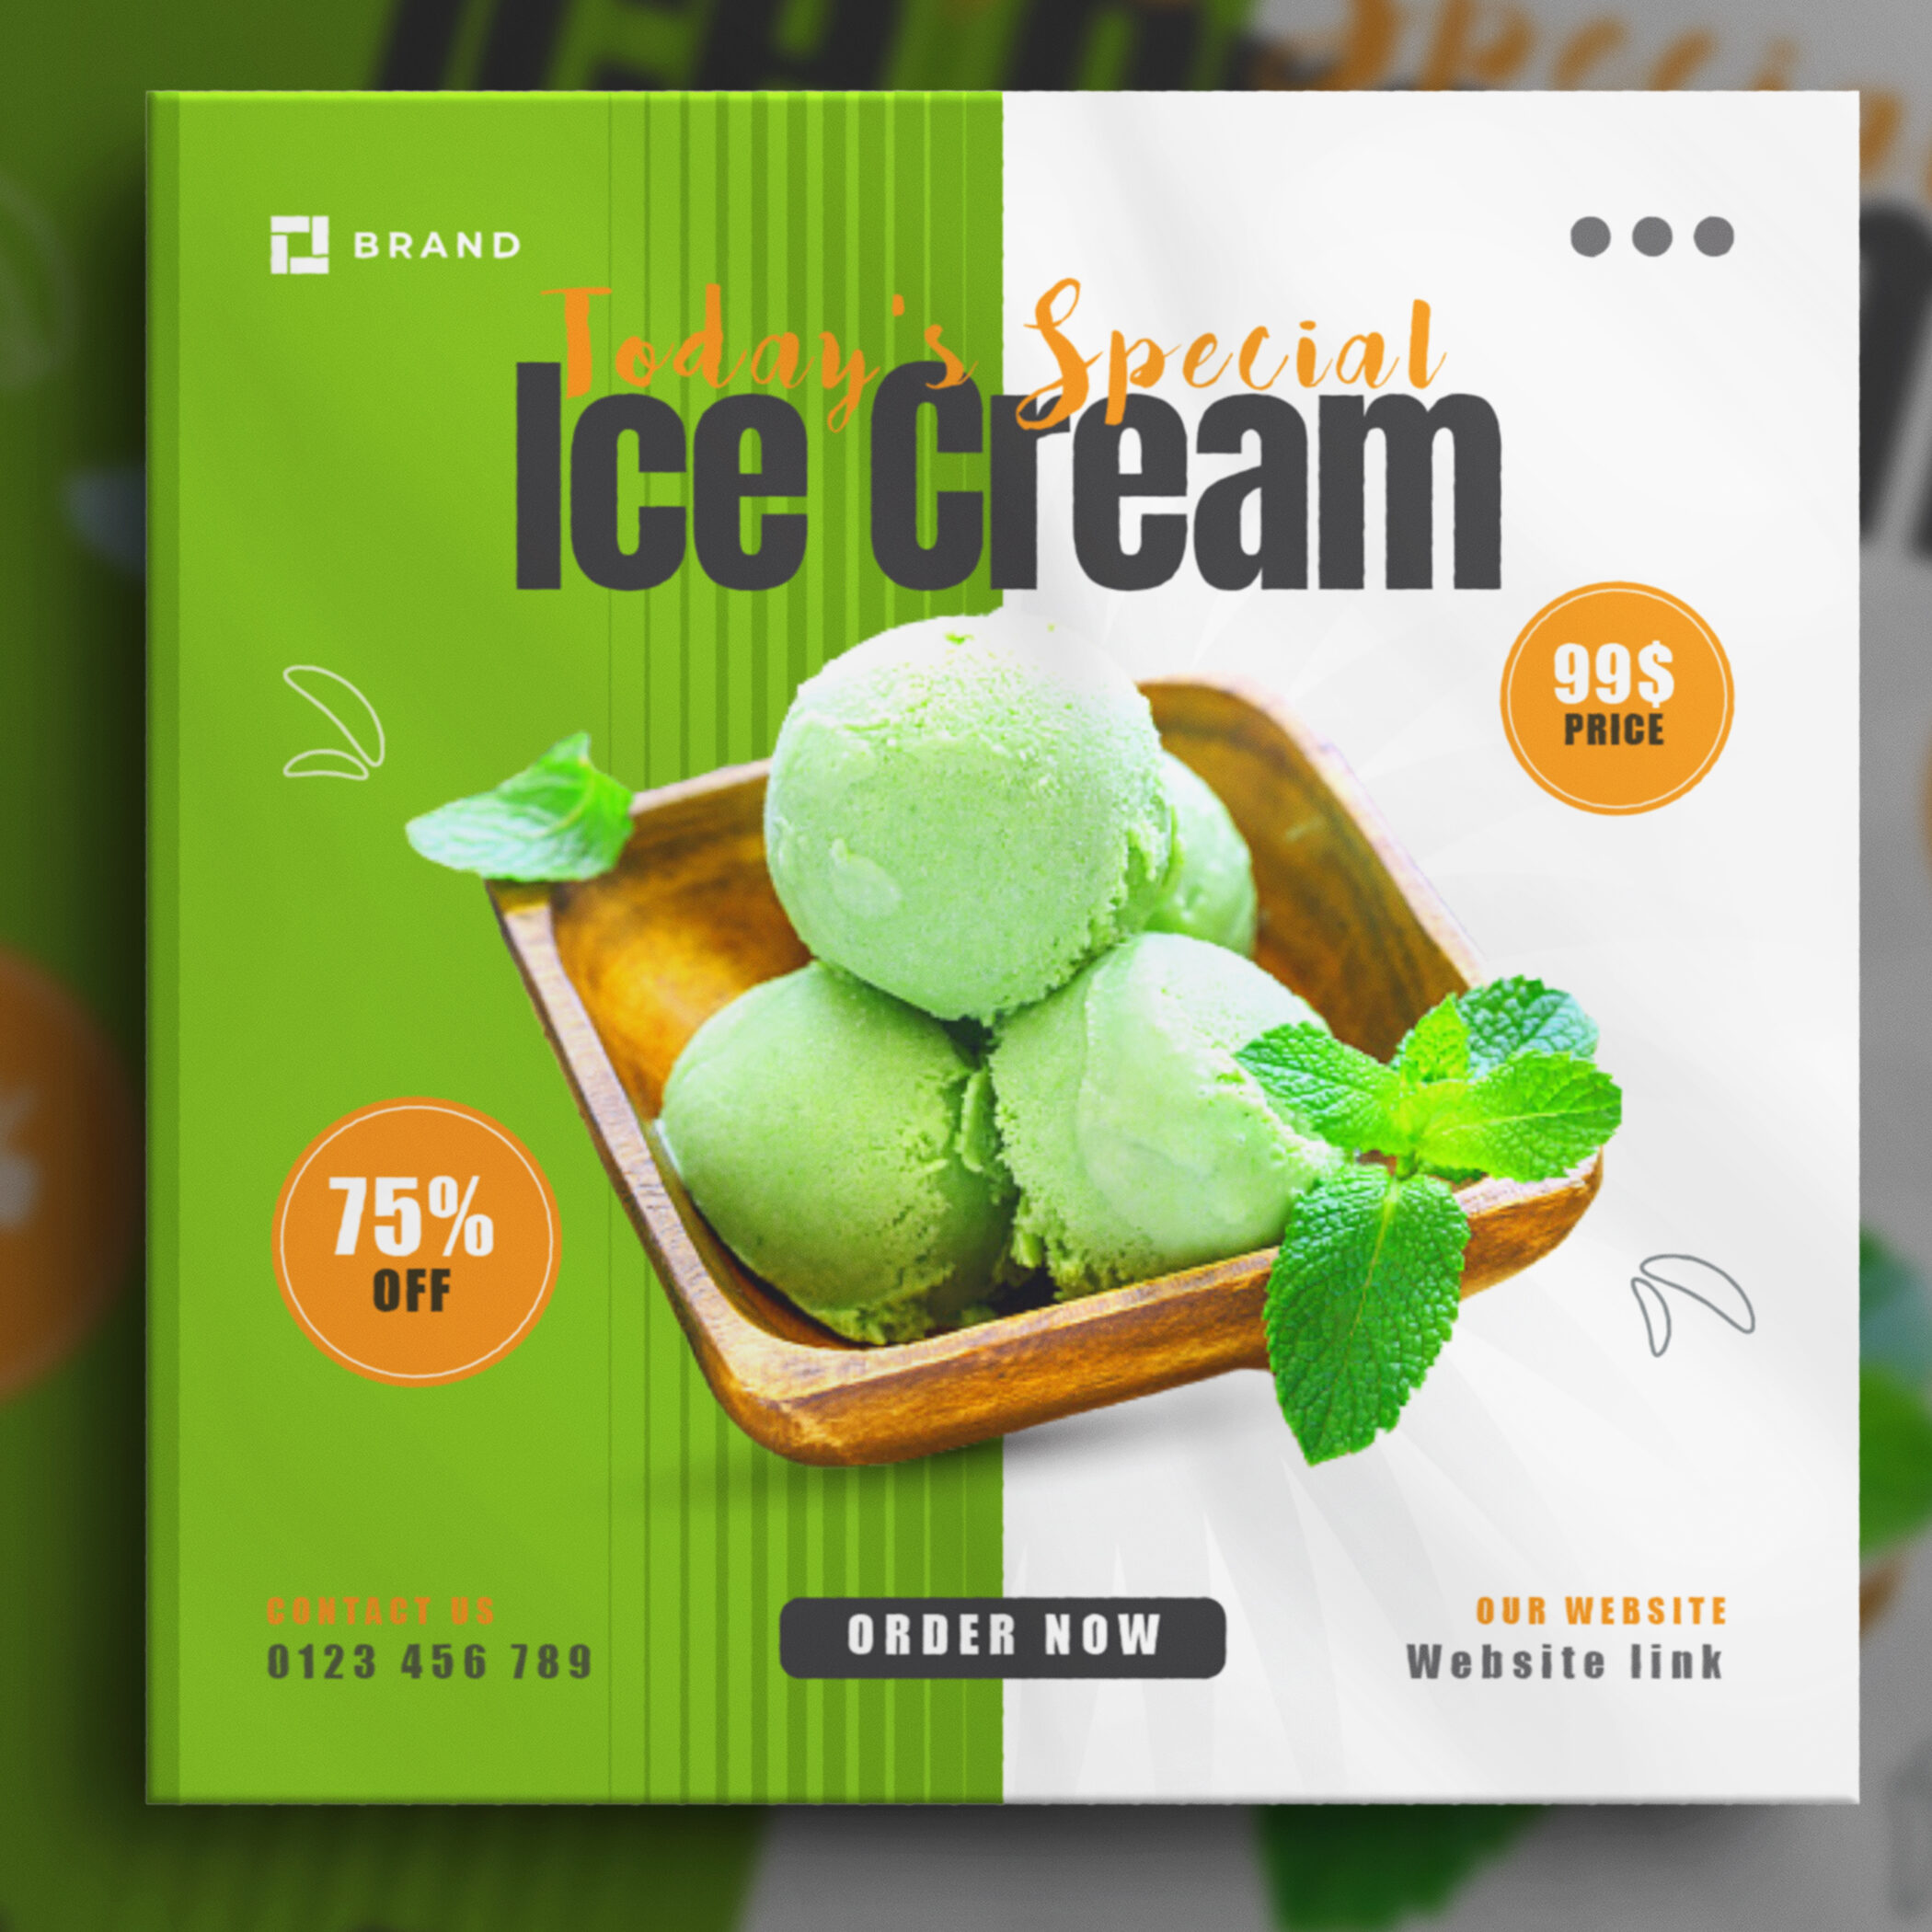 Delicious ice cream and instagram food social media banner post design template